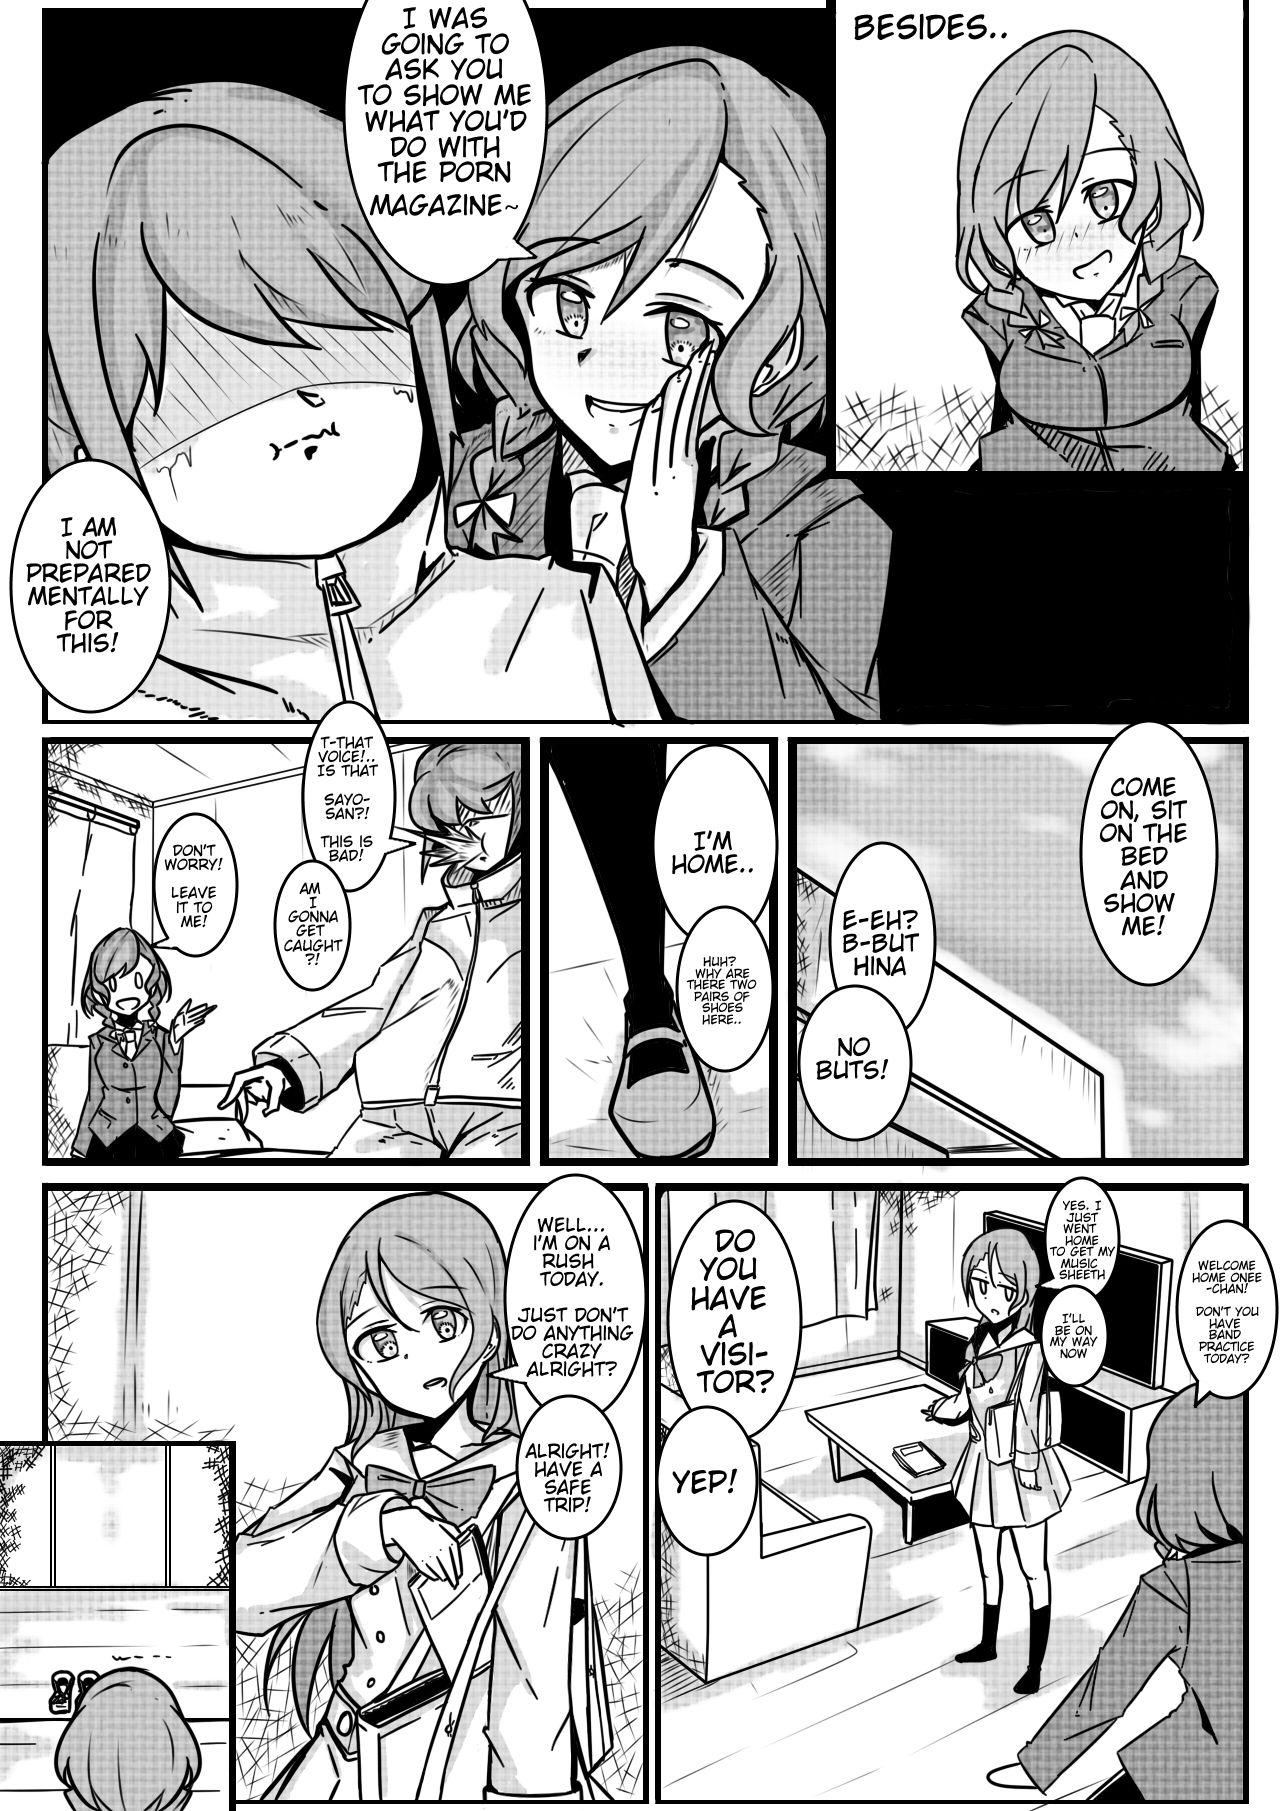 Concha Minty Surprise - Bang dream Making Love Porn - Page 8